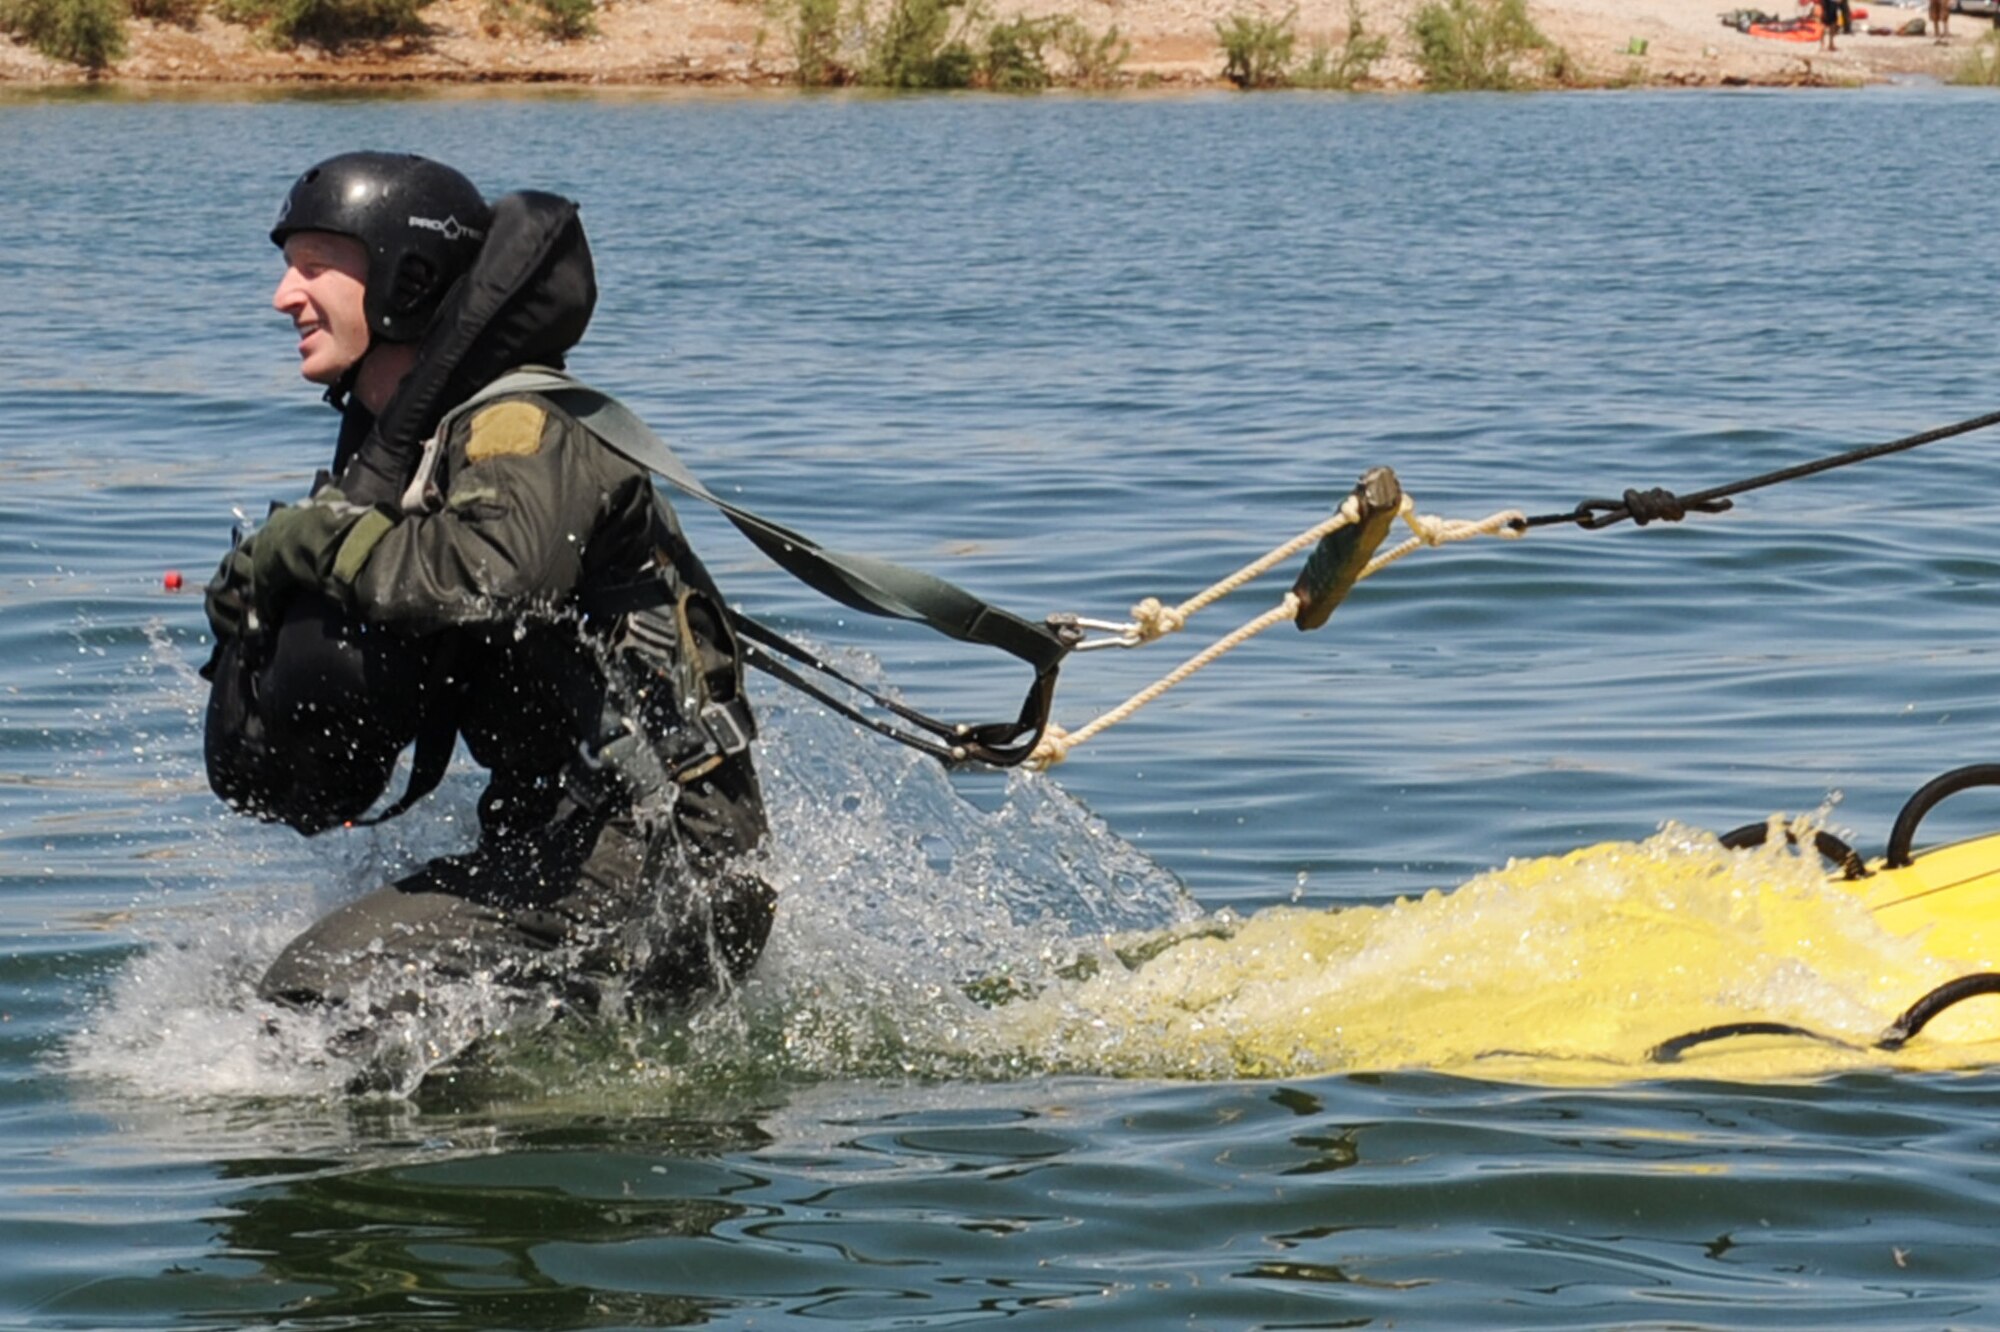 U.S. Air Force Capt. Justin Elliott, 422nd Test and Evaluation Squadron, F-15E Strike Eagle Division pilot, jumps into the lake for a simulation parachute drag during water survival training with 57th Operation Support Squadron Survival, Evasion, Resistance and Escape Specialists at Lake Mead, Nev. Aug. 17, 2011.  SERE specialists train high risk aircrew personnel to survive, evade, and return should they eject, bailout, or otherwise become isolated during combat, anywhere in the world. (U.S. Air Force photo by Staff Sgt. Taylor Worley/Released)